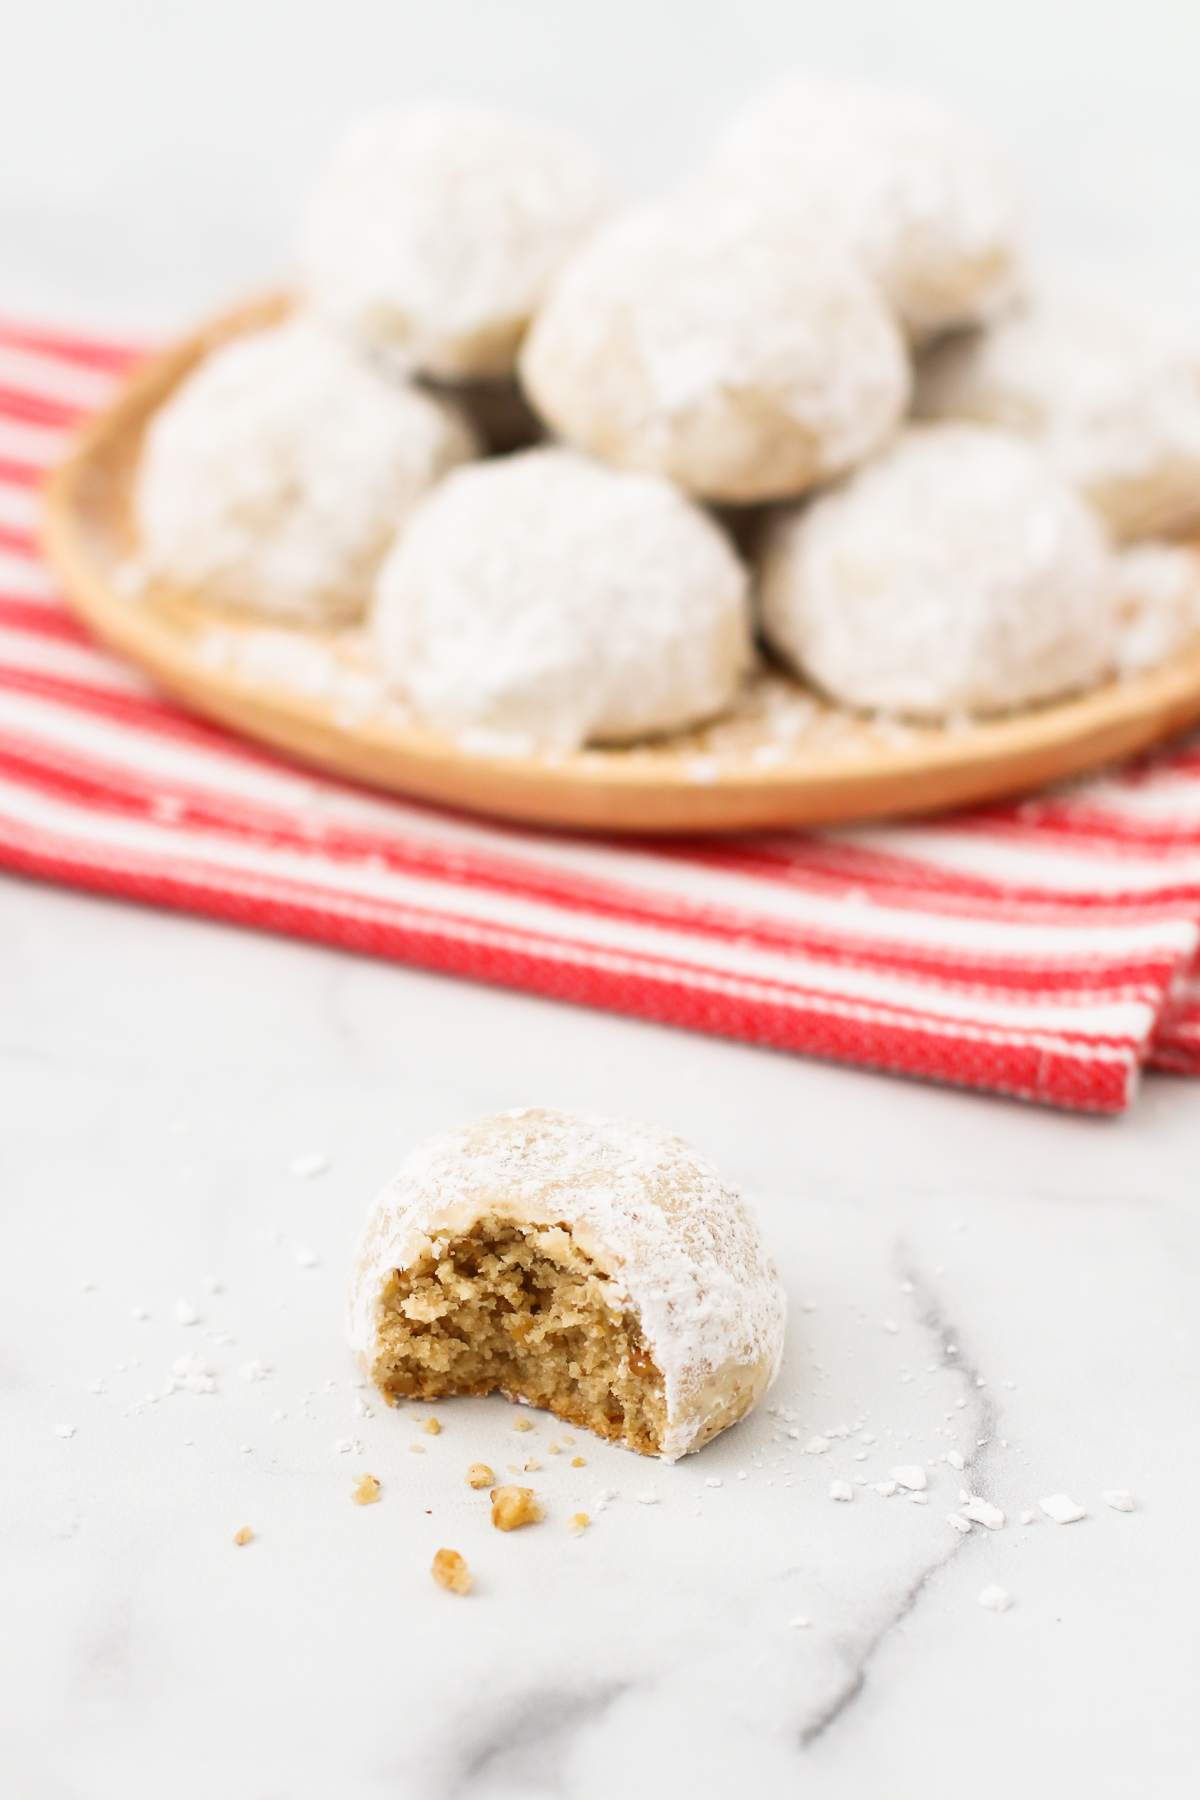 A simple holiday cookie that’s made with toasted walnuts and rolled in powdered sugar. What’s not to love about these gluten free vegan snowball cookies?